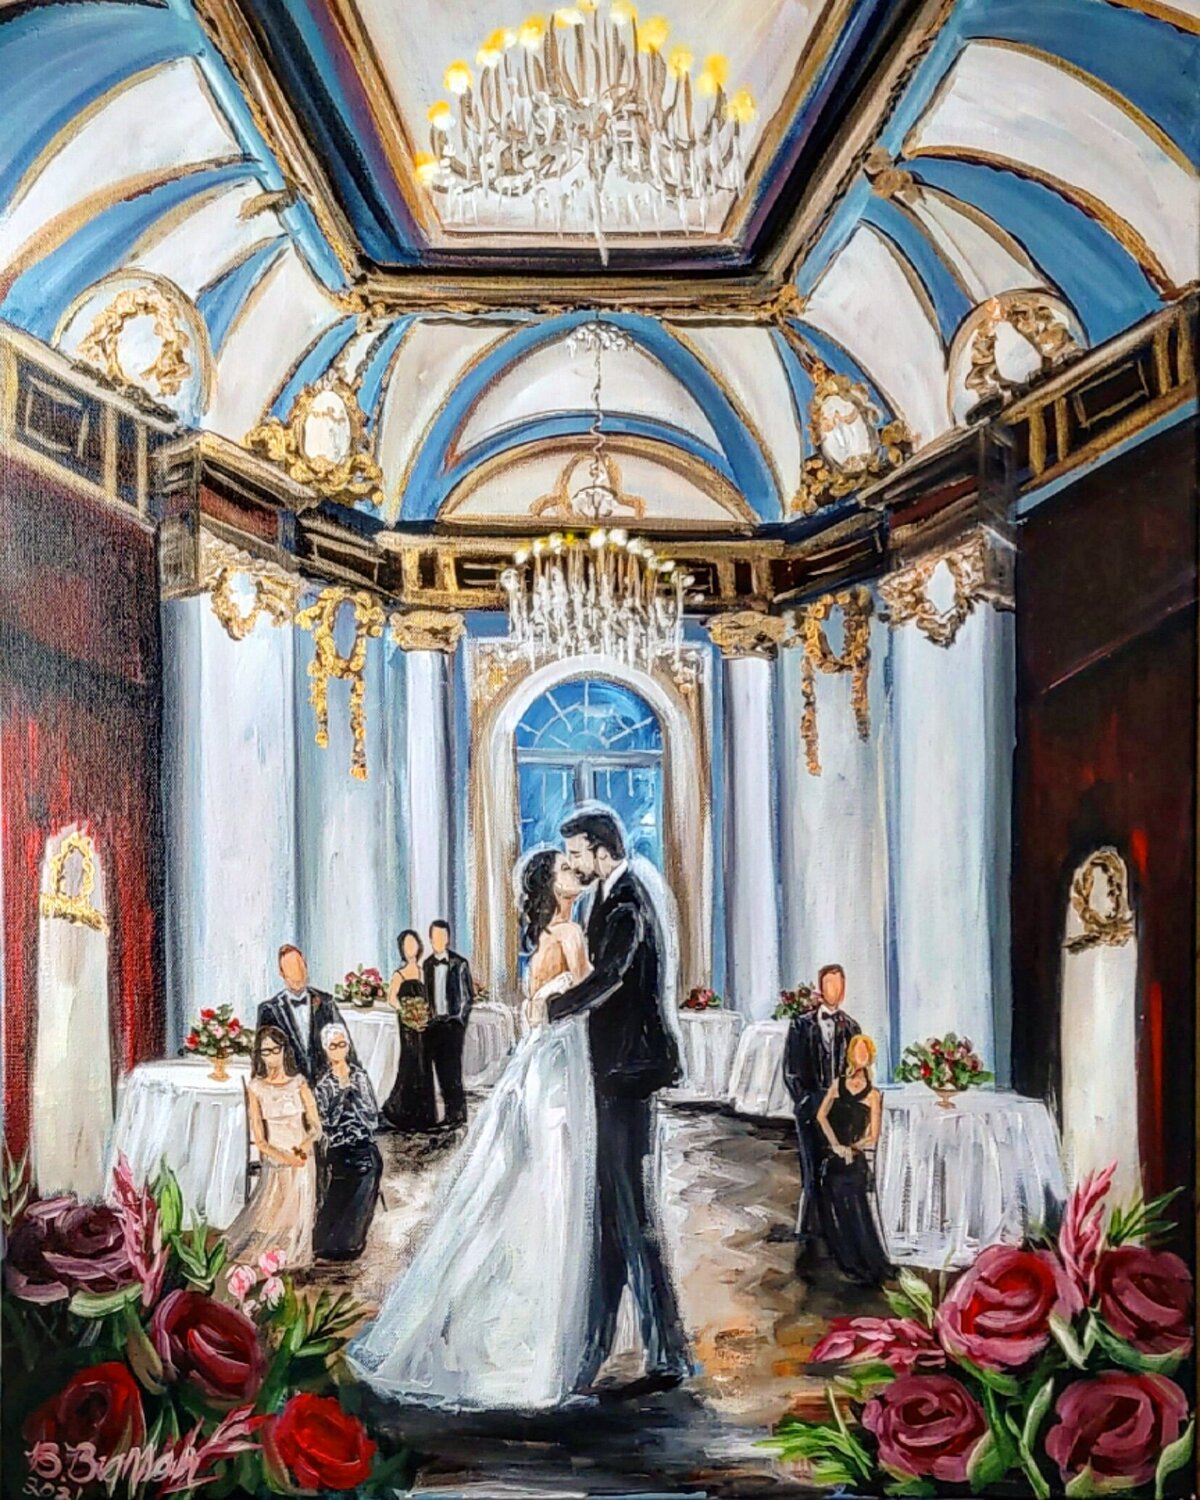 First kiss live wedding painting at the Belvedere in Baltimore, Maryland. Couple in wedding attire are surrounded by their parents.